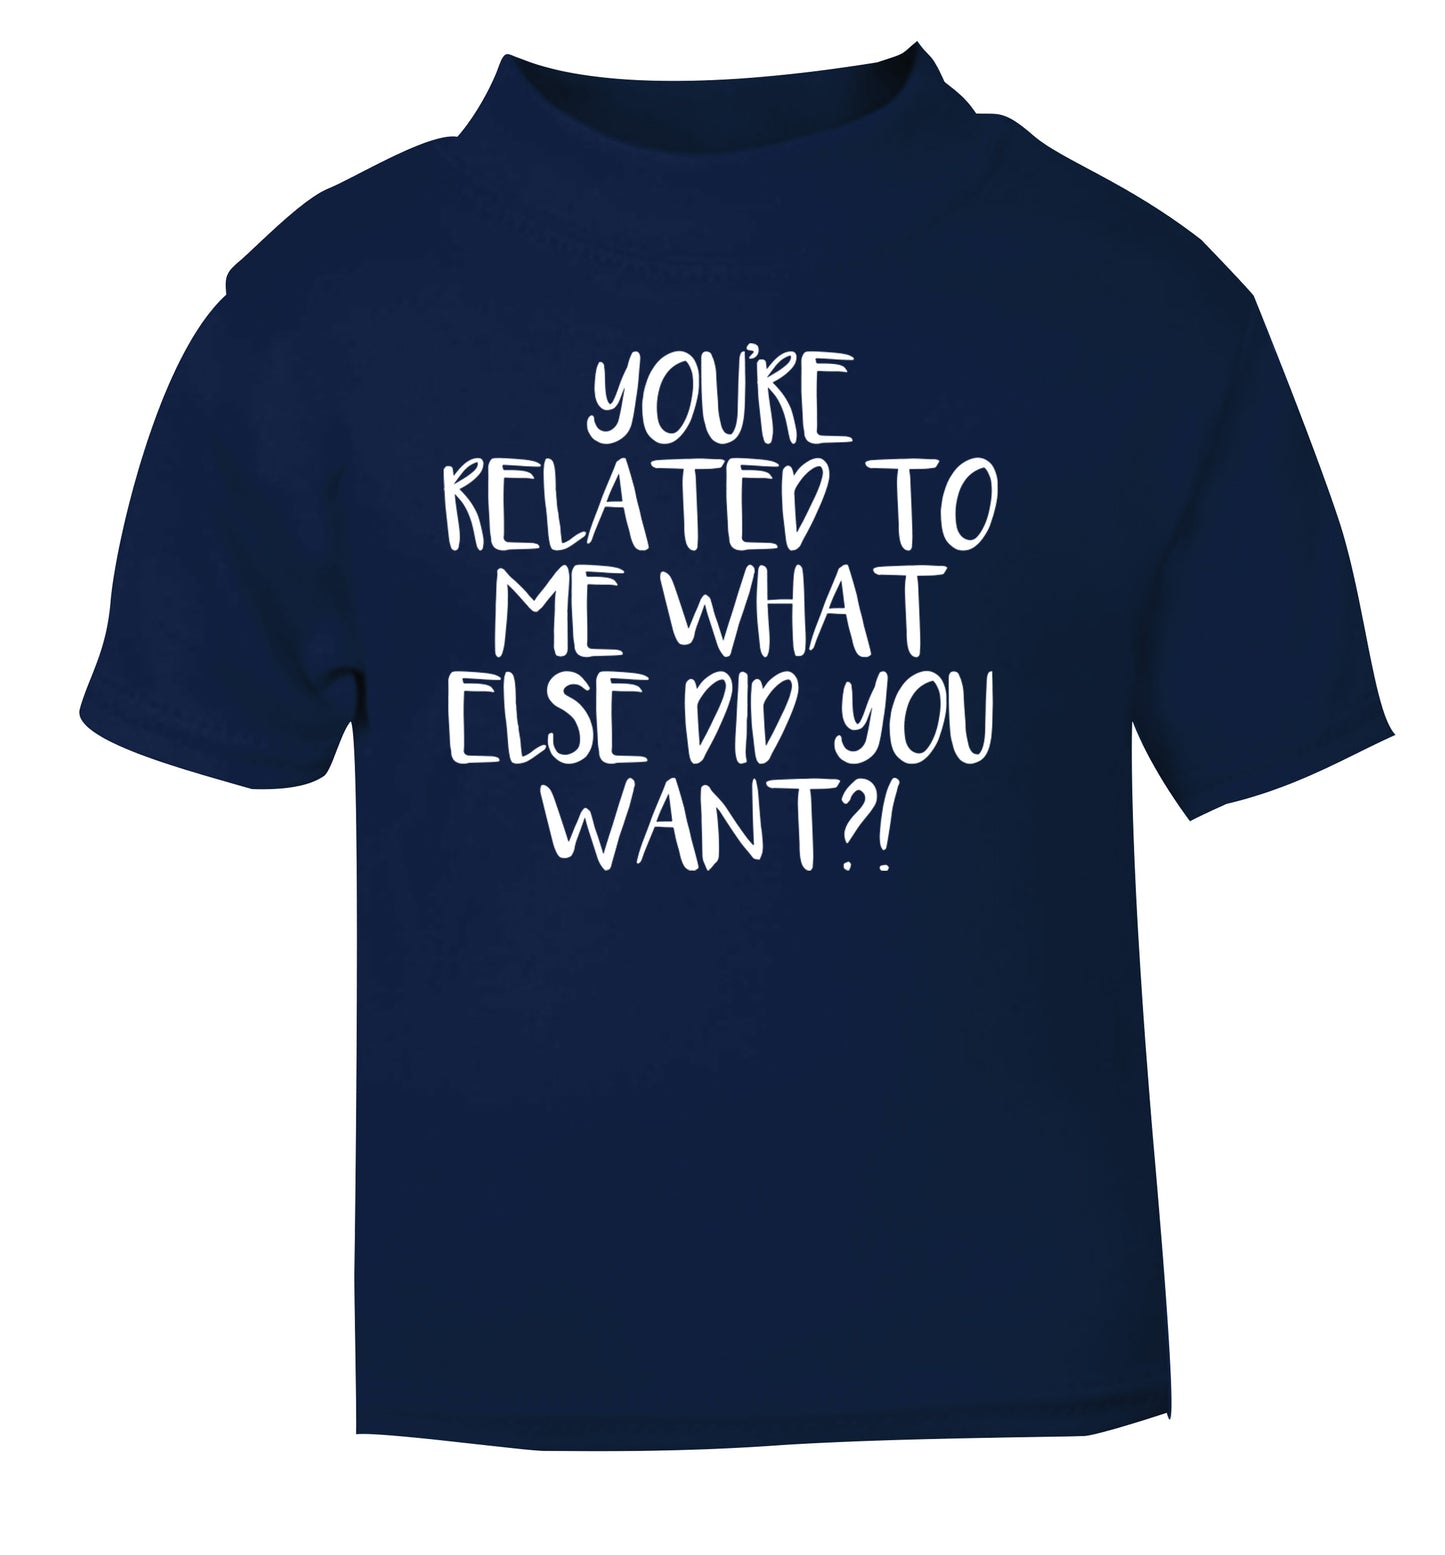 You're related to me what more do you want? navy Baby Toddler Tshirt 2 Years